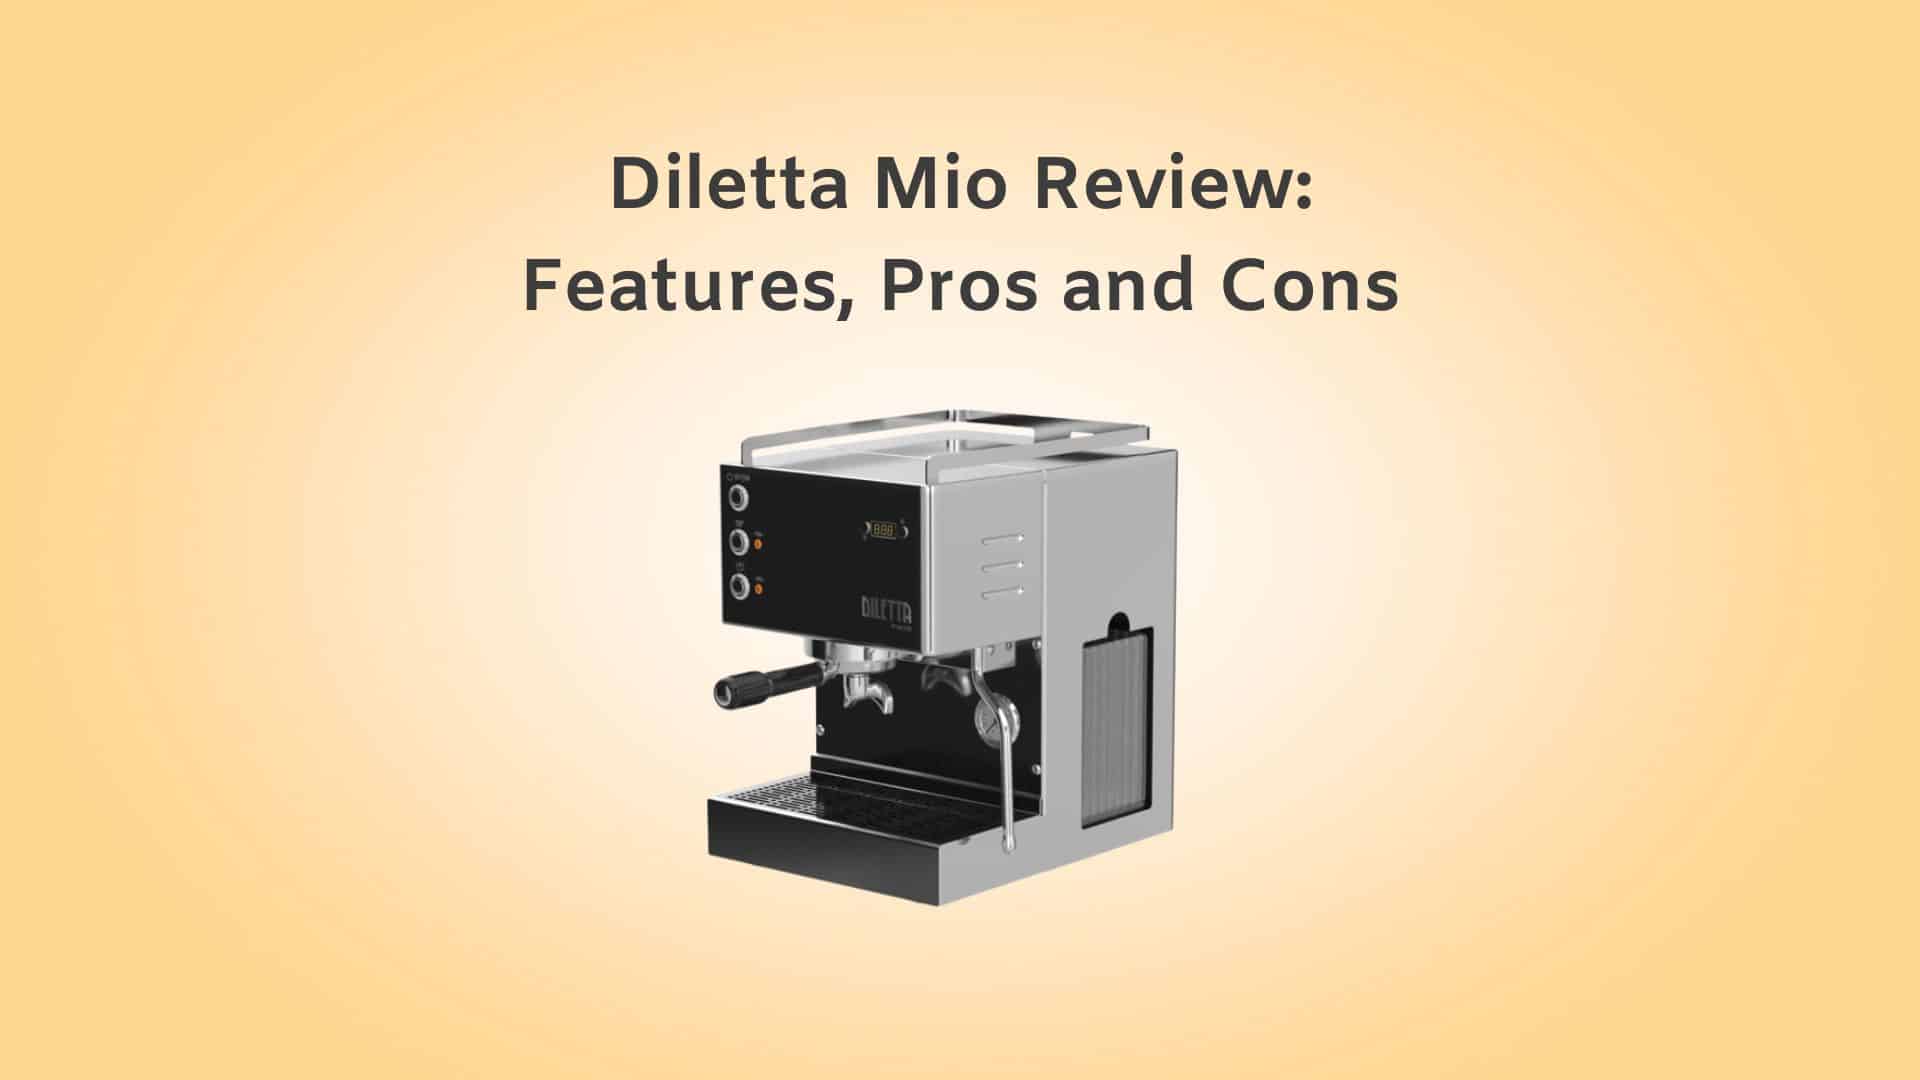 Diletta Mio Review: Features, Pros and Cons